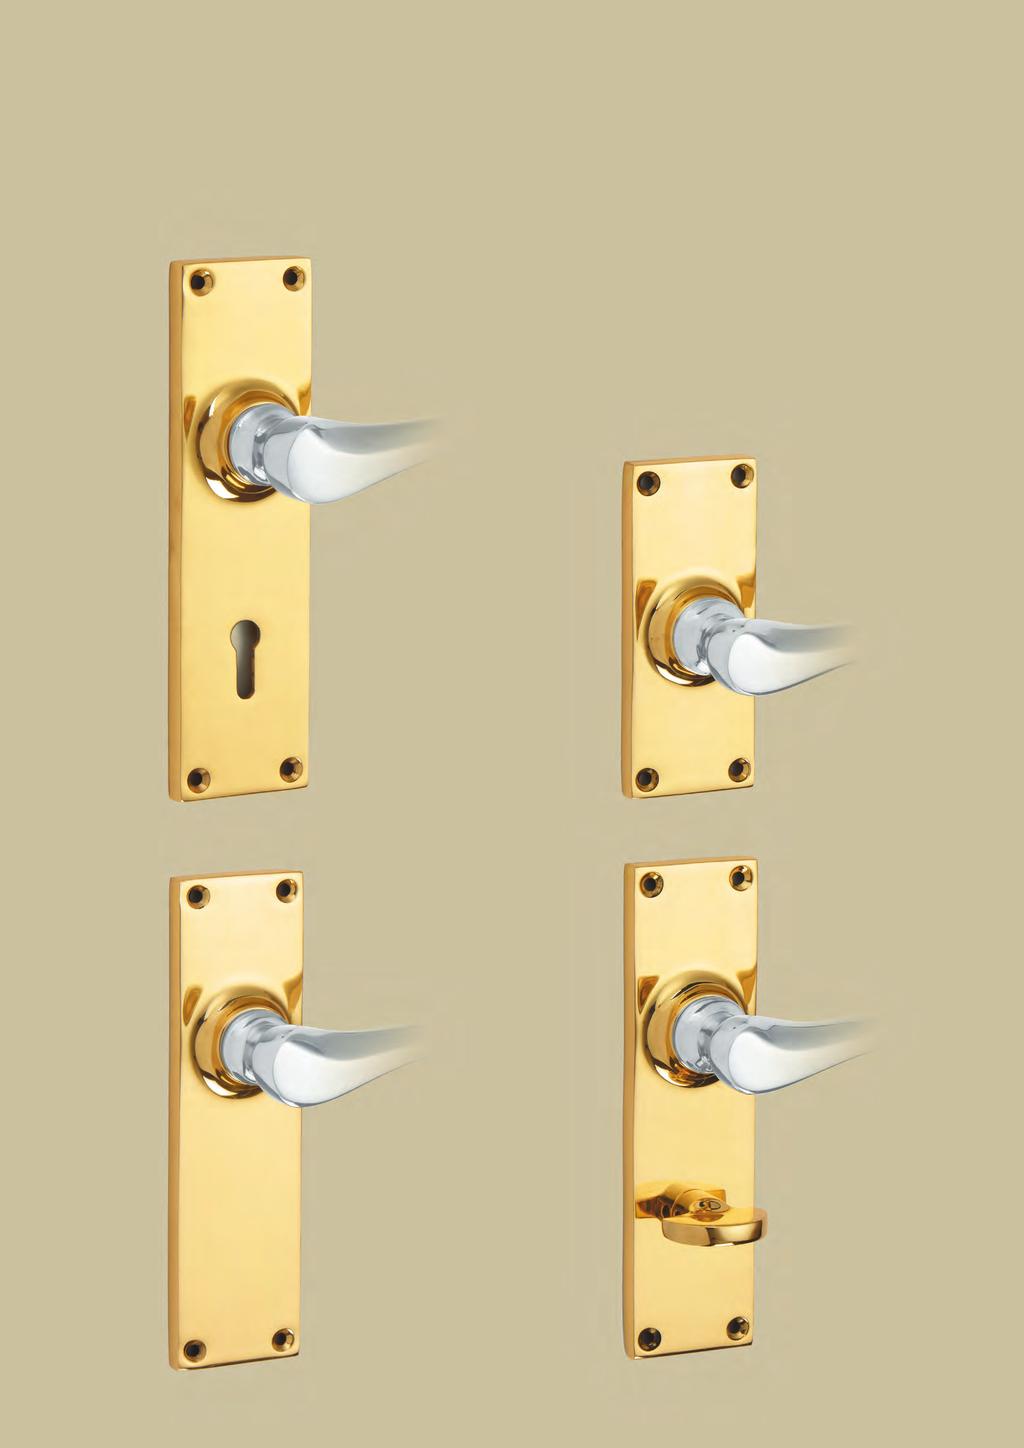 1 lever furniture - backplate range Pages 19-21 illustrate our range of backplates. These can be used in conjunction with the lever styles on the following pages.